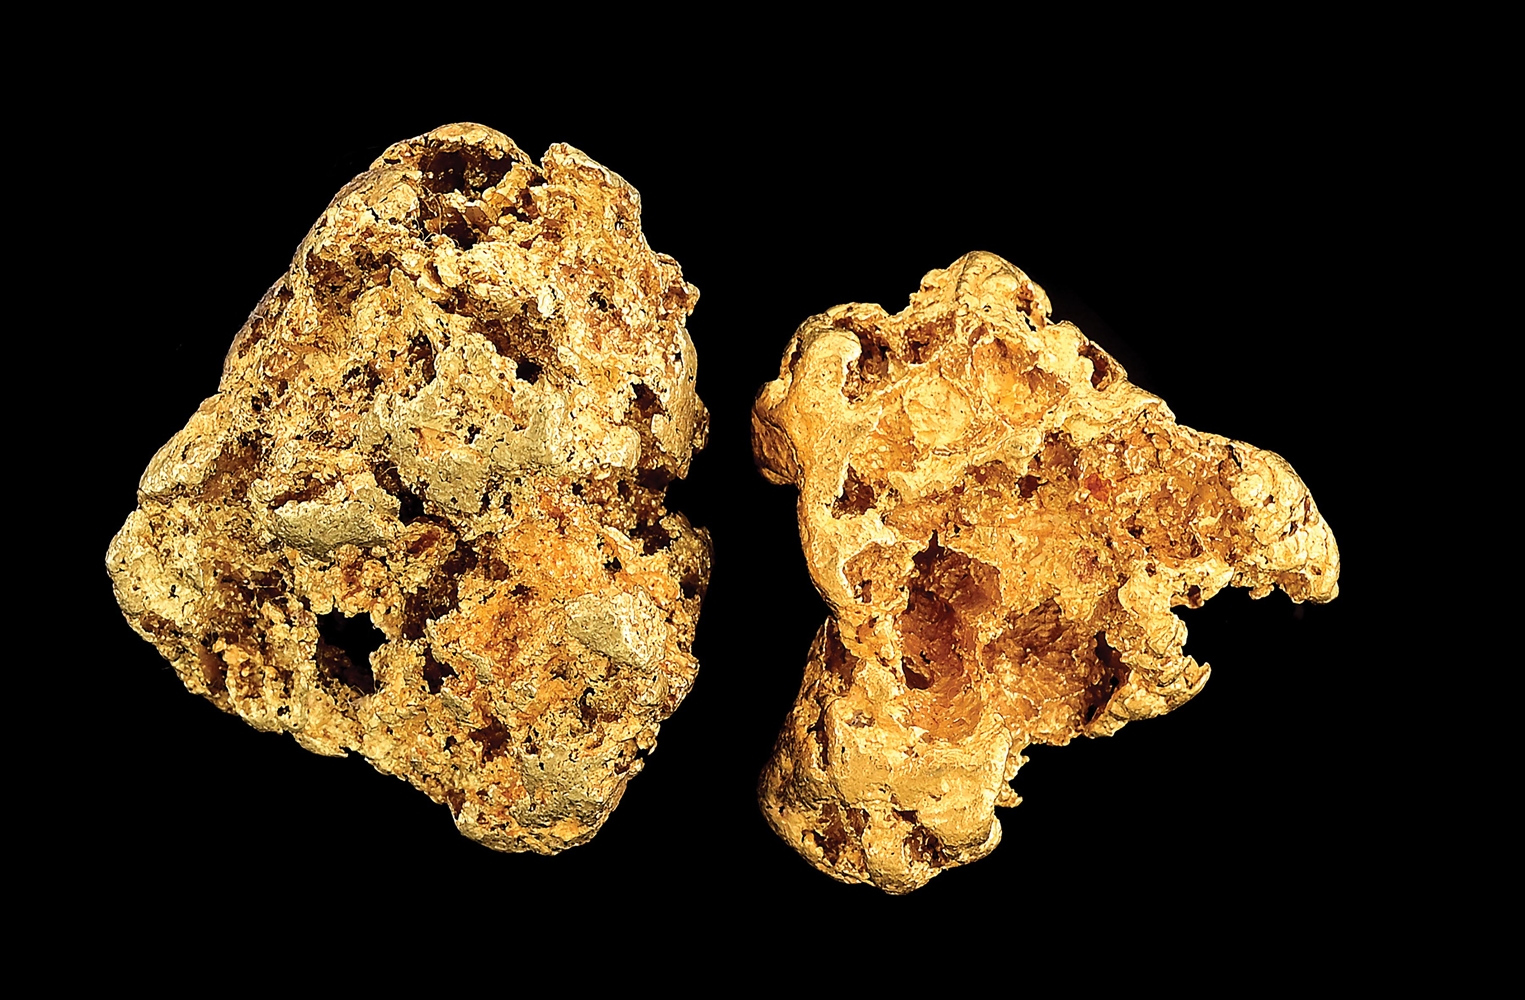 LOT OF 2: GOLD NUGGETS 55 GRAMS.